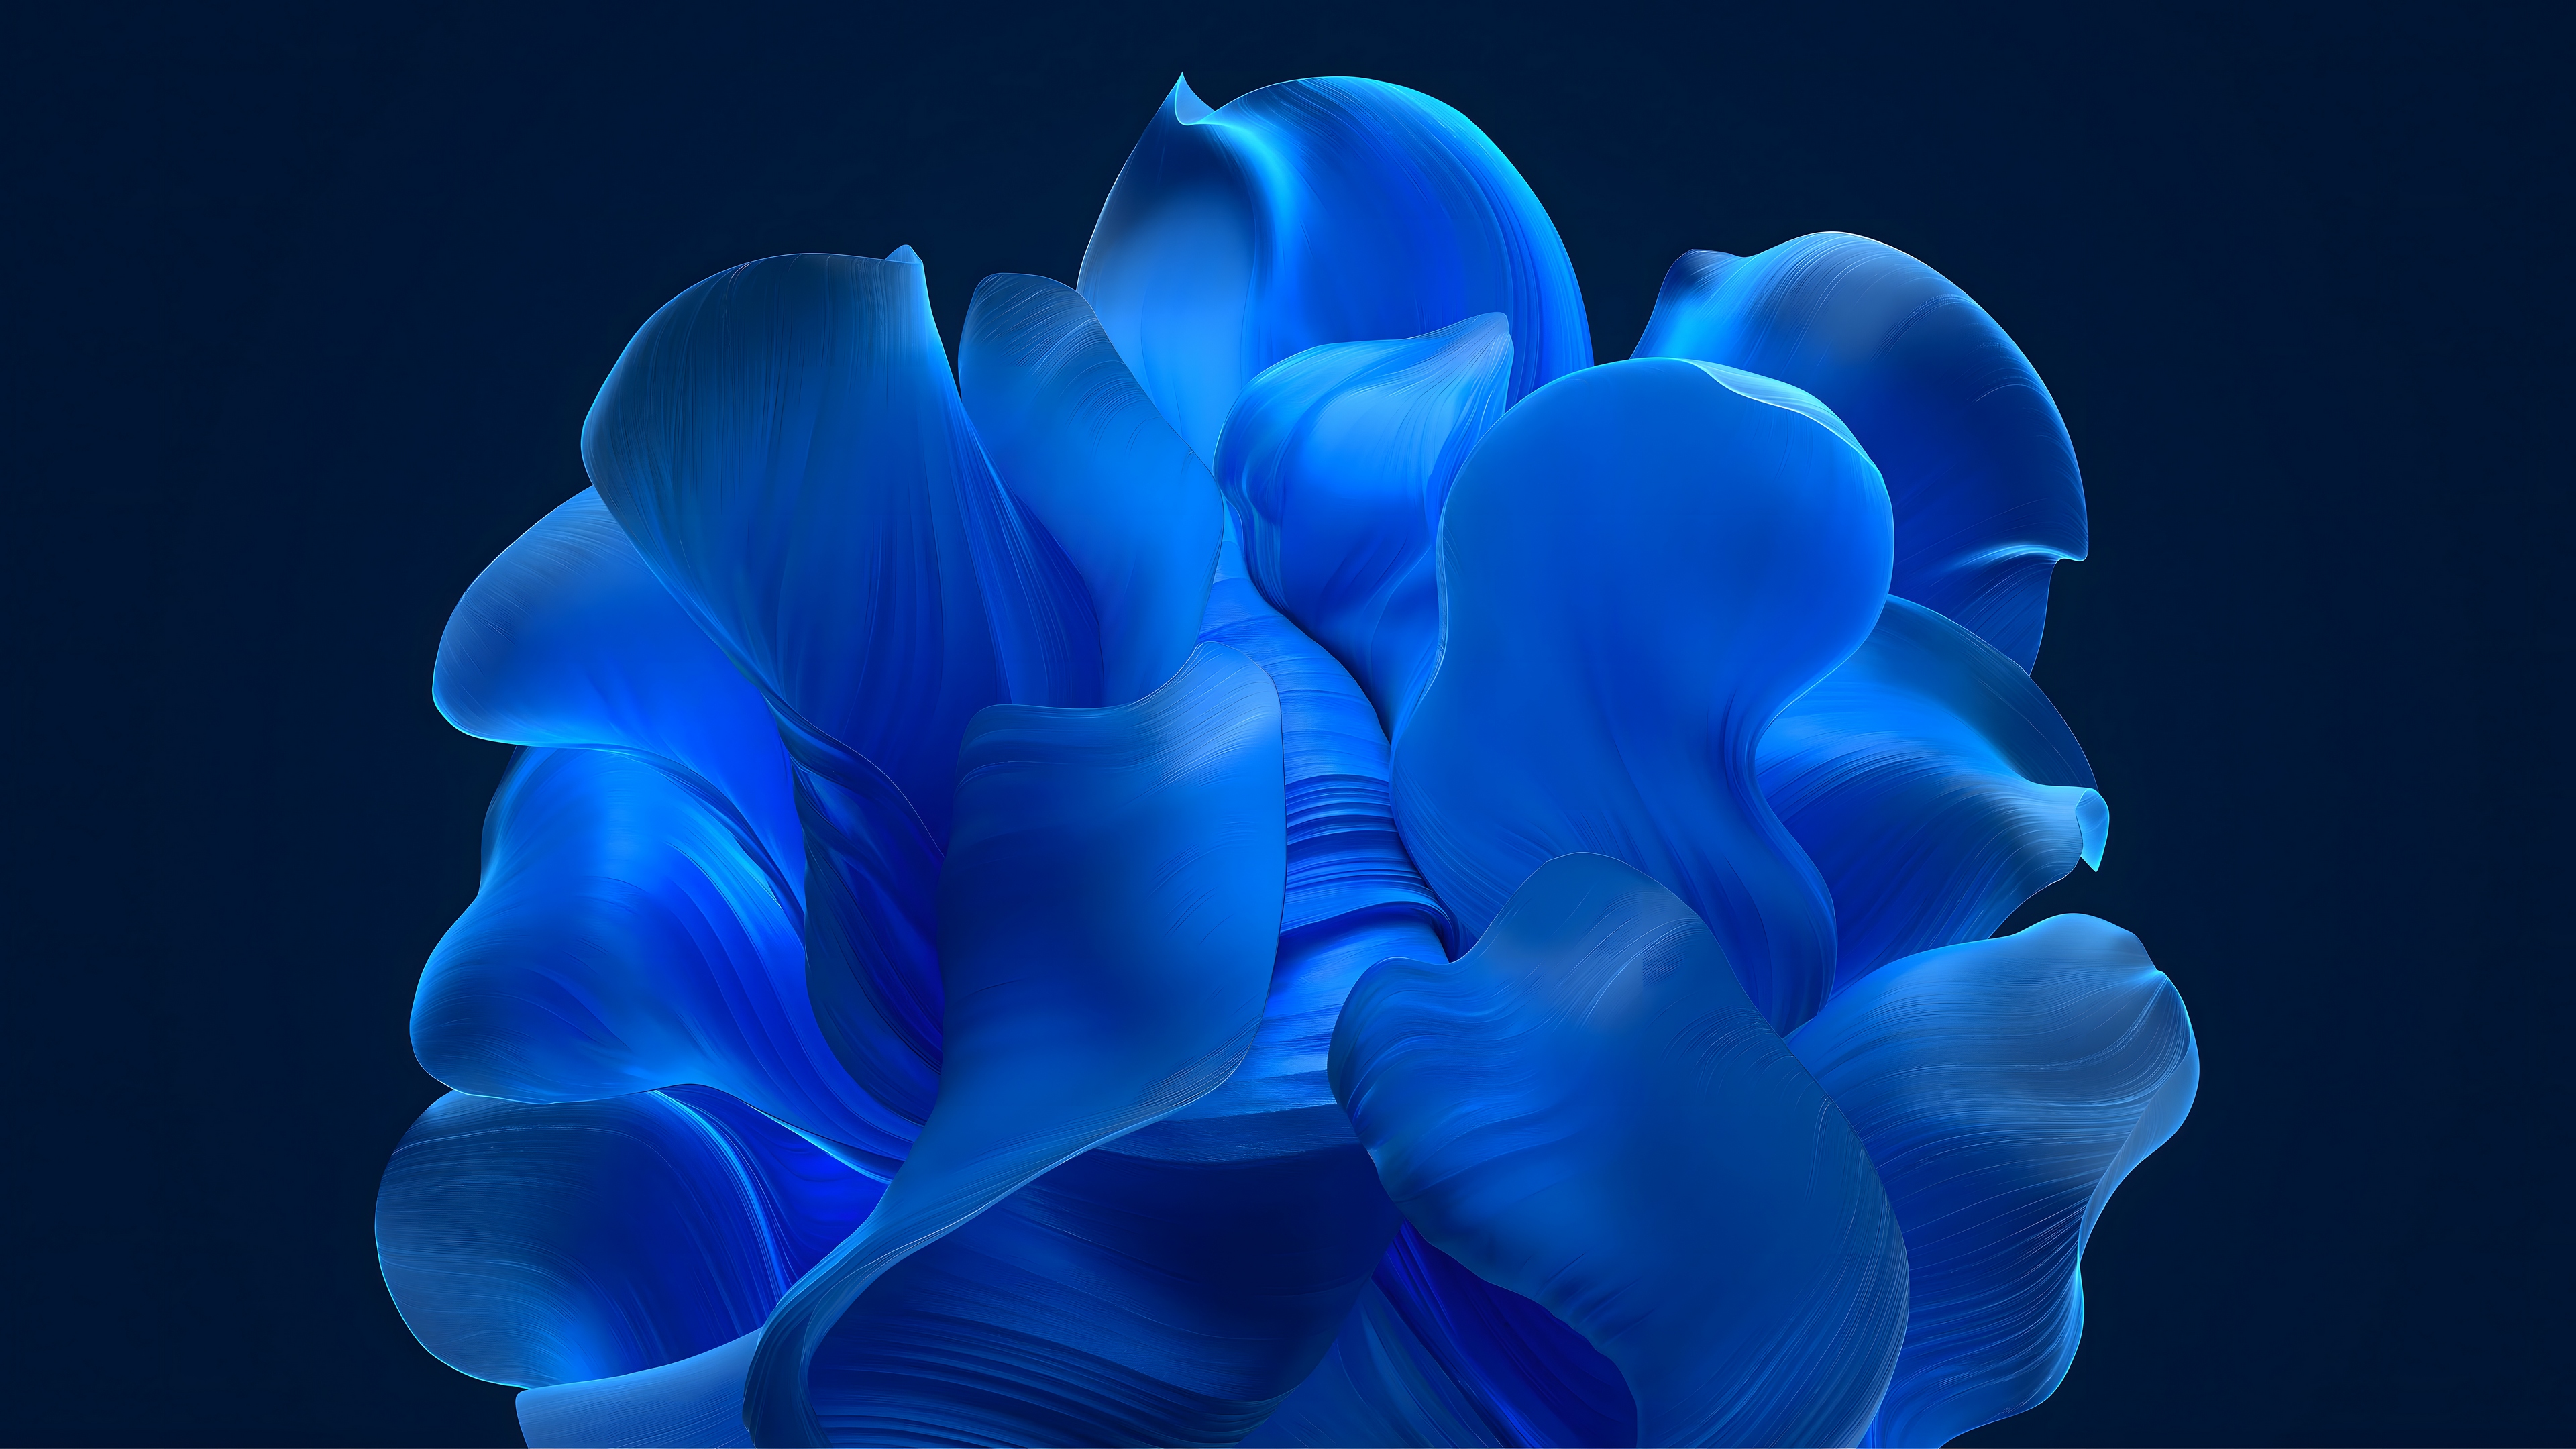 Waves in the form of a flower petal